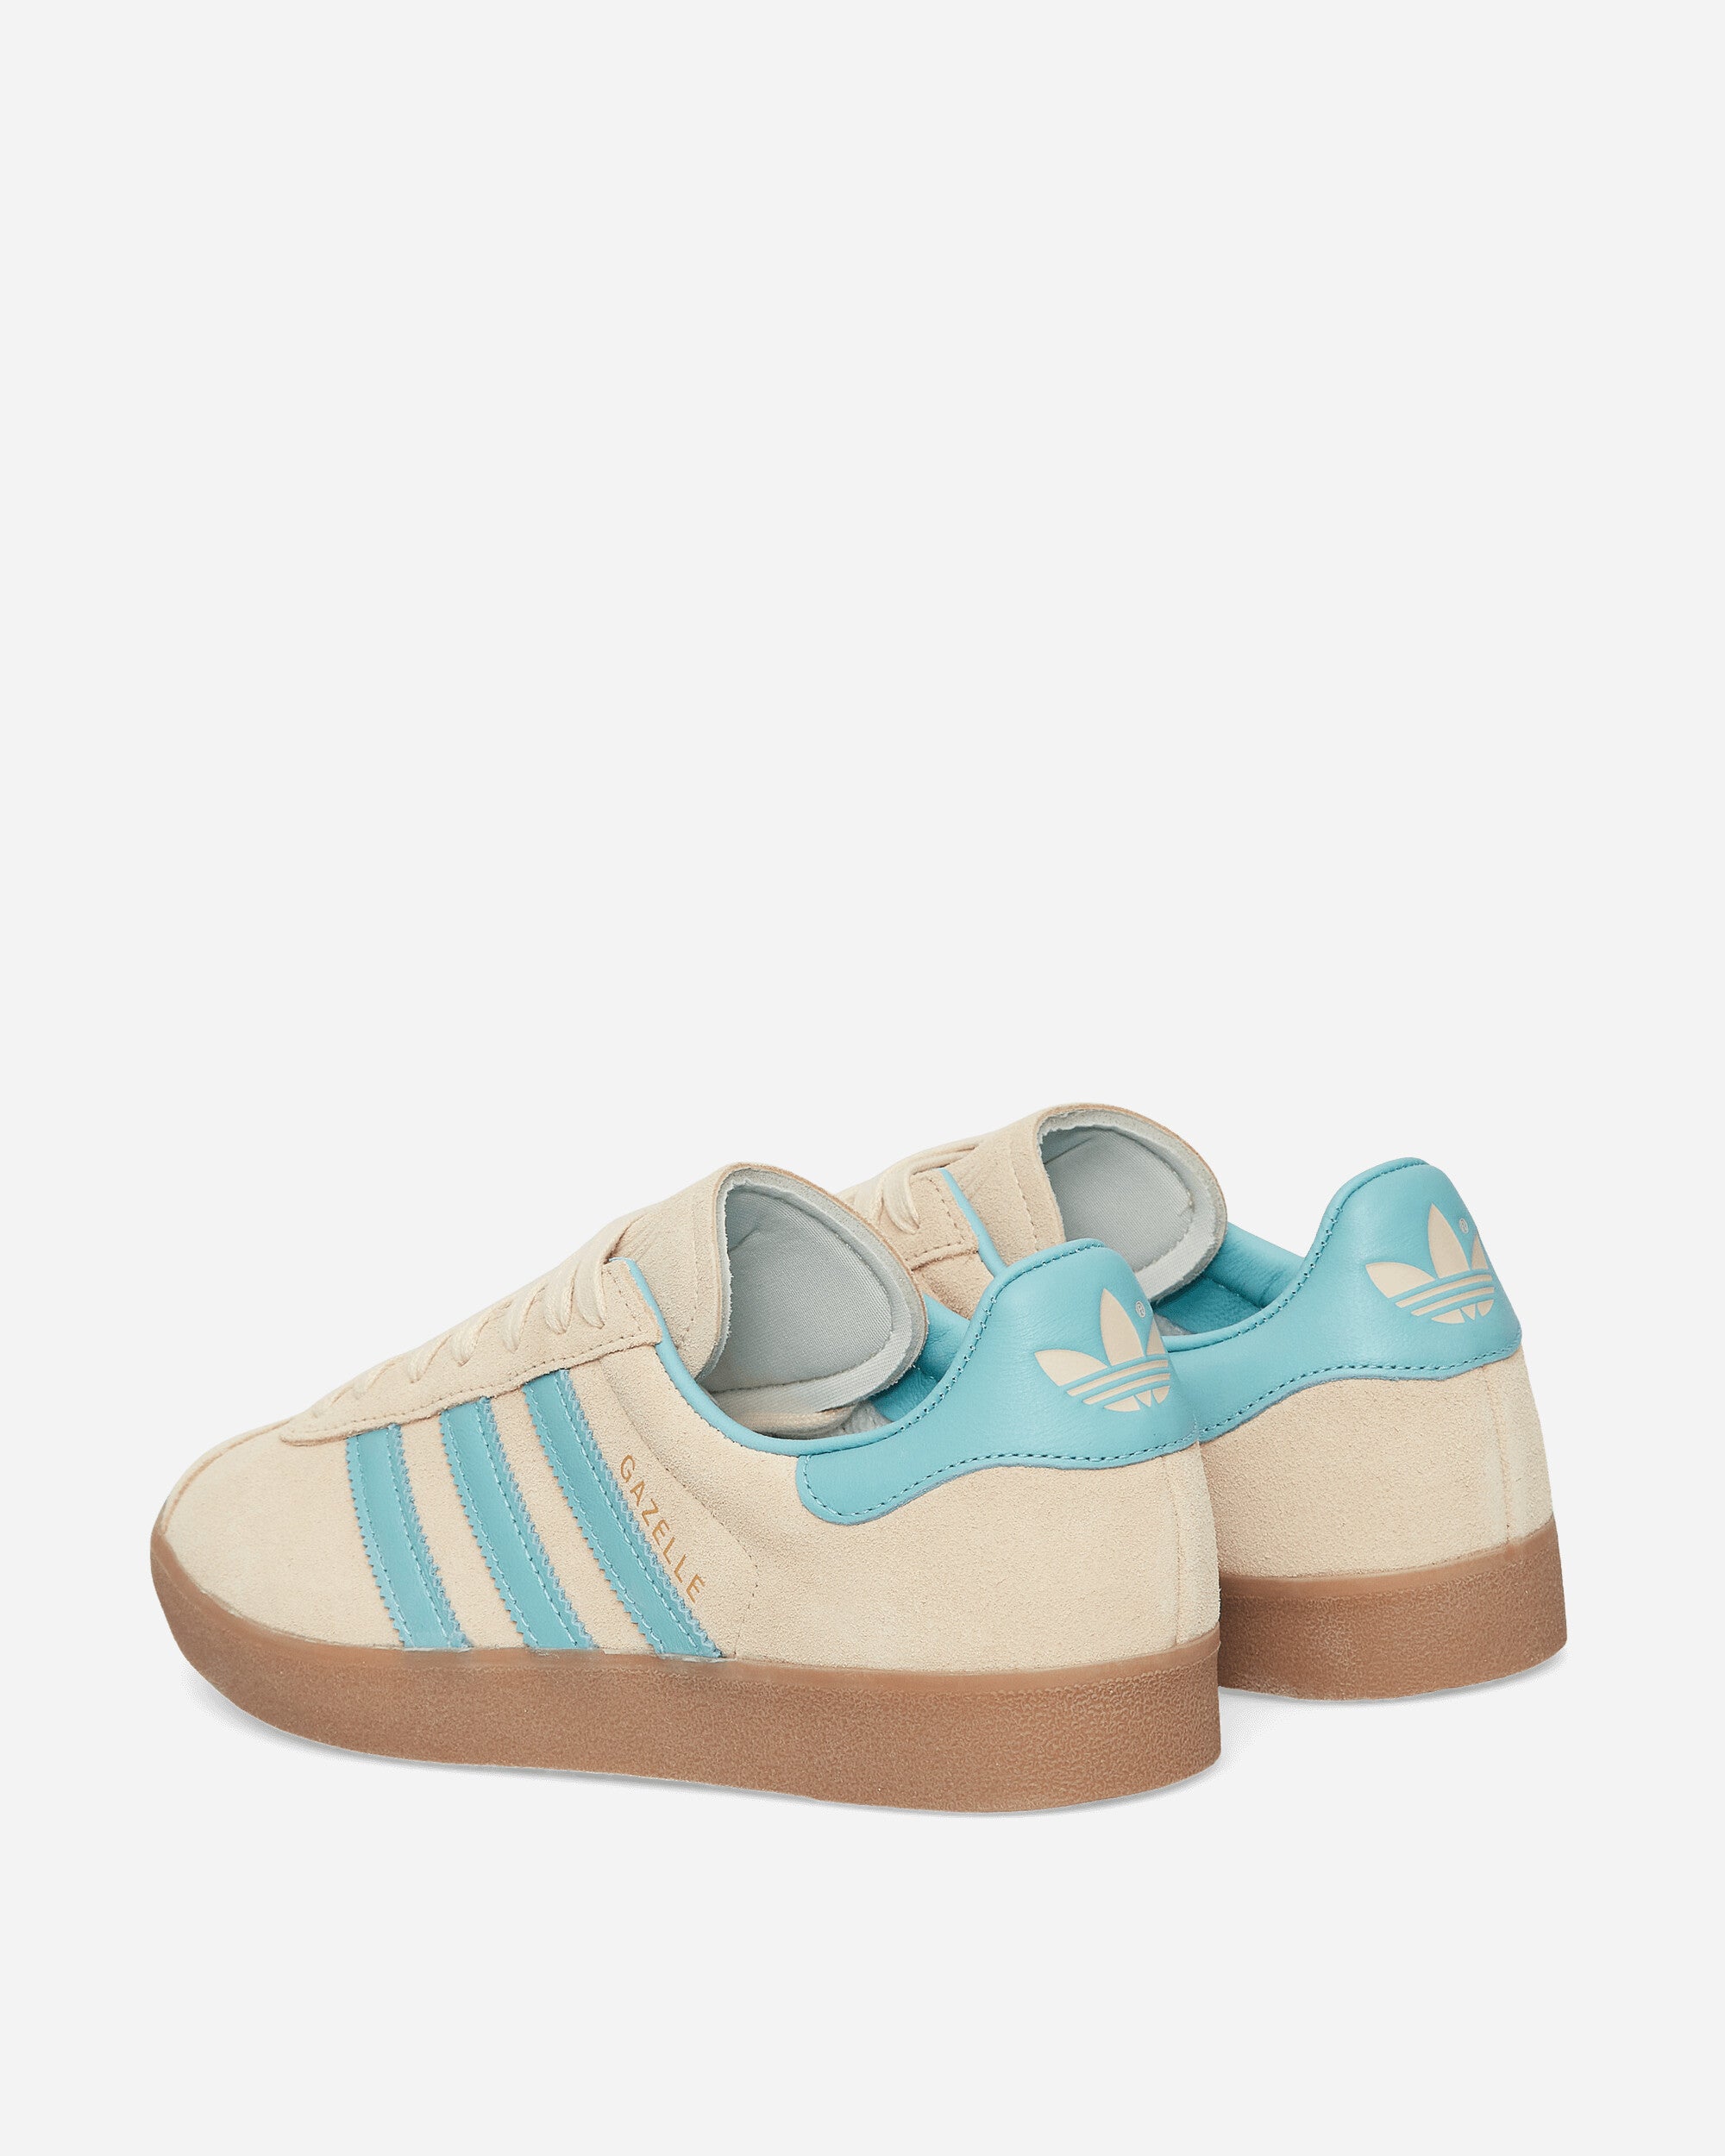 adidas Gazelle 85 Crystal Sand/Easy Mint Sneakers Low IE3434 001